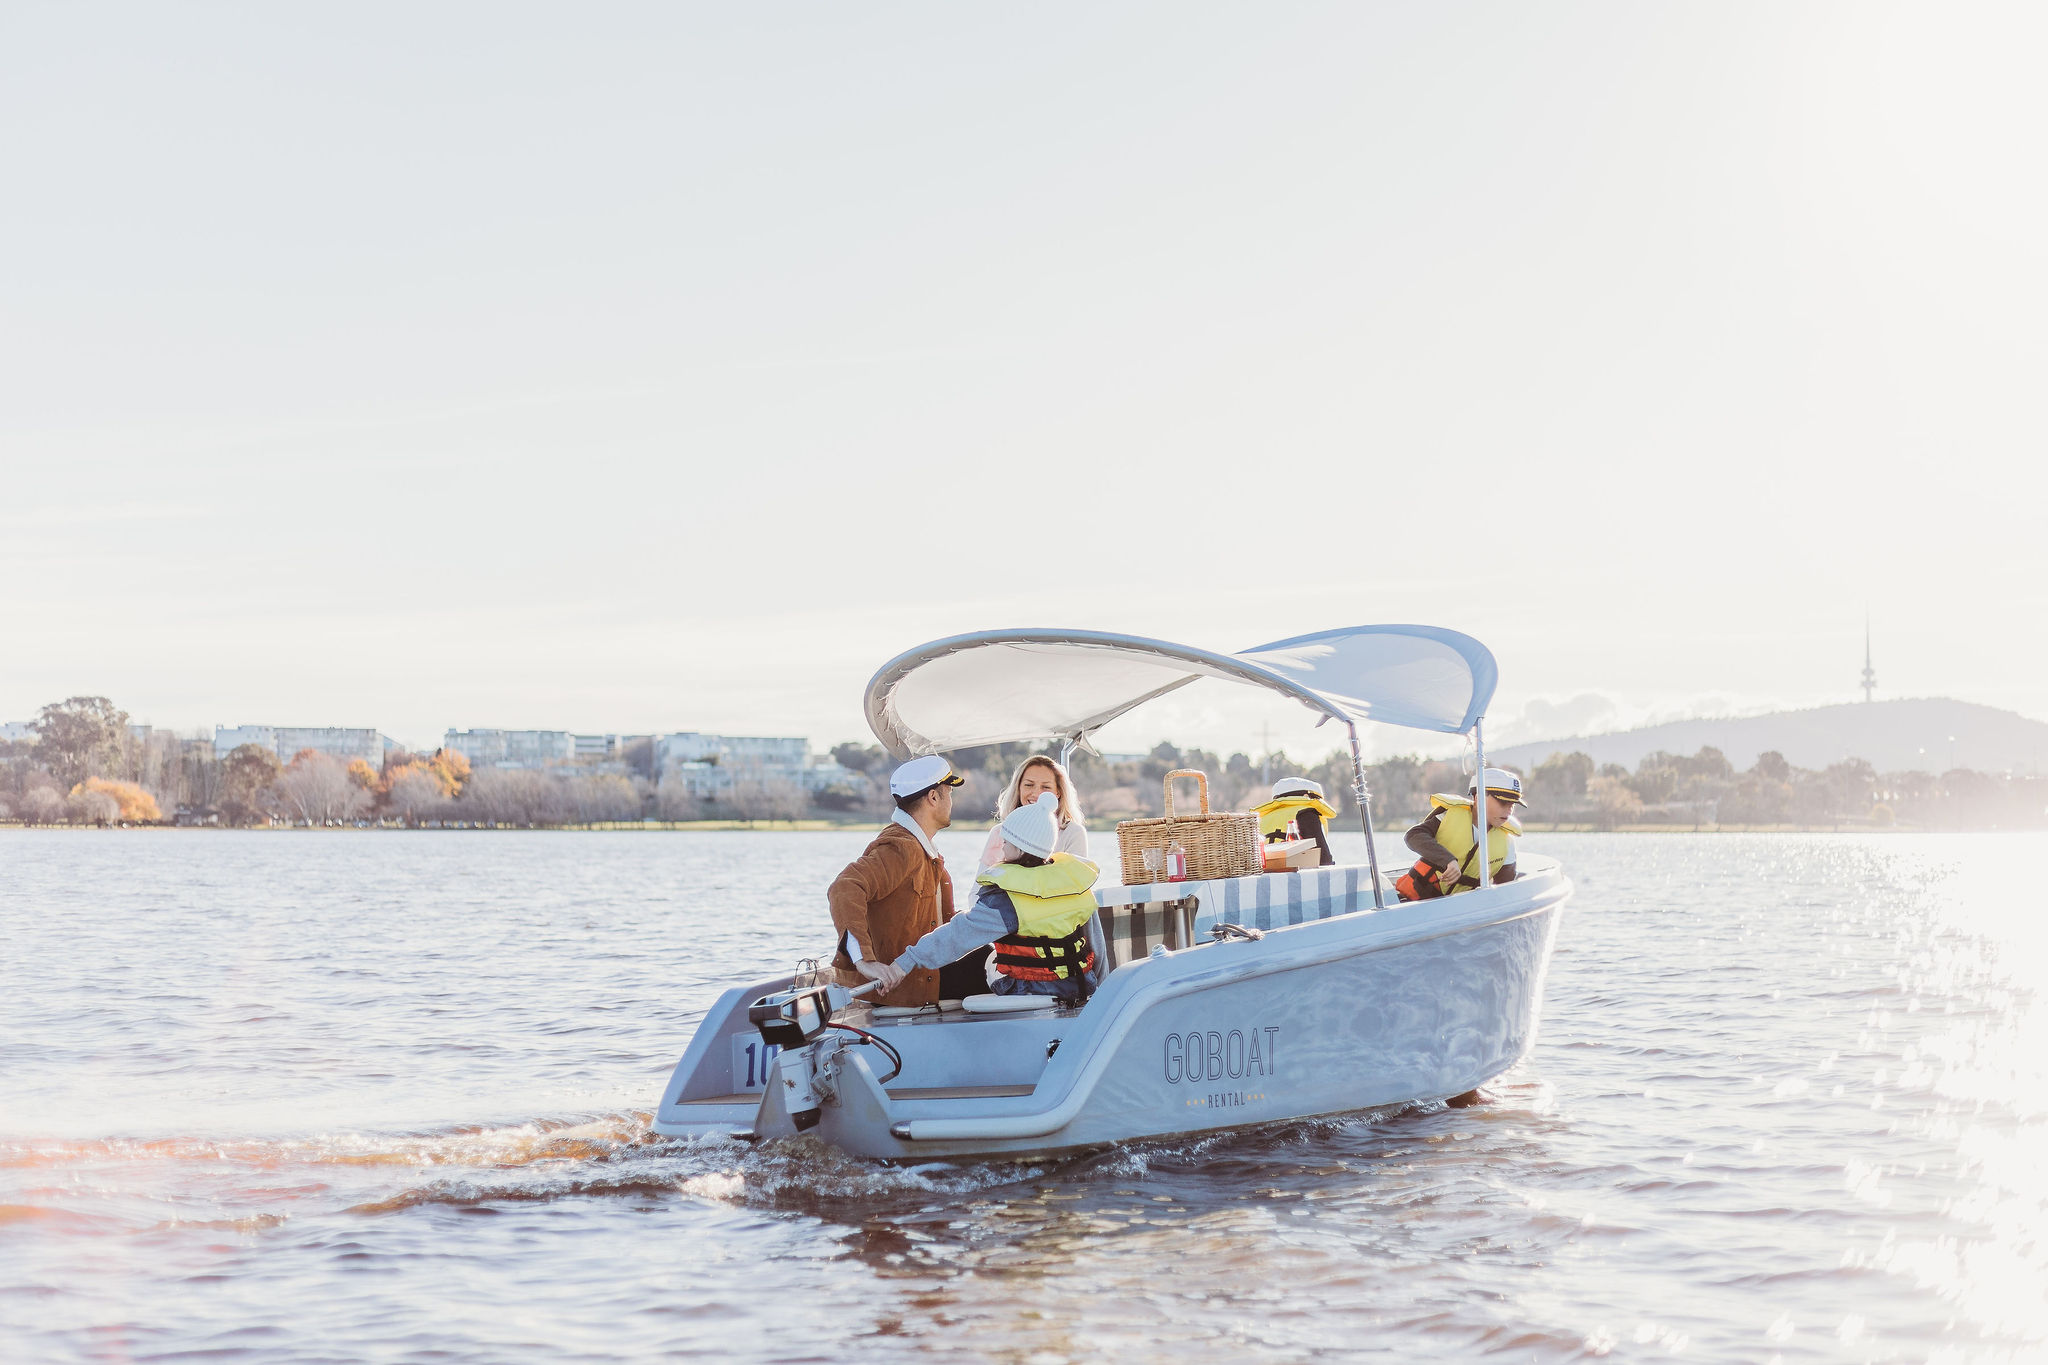 GoBoat Canberra - 3 Hour Electric Picnic Boat Hire (up to 8 people)